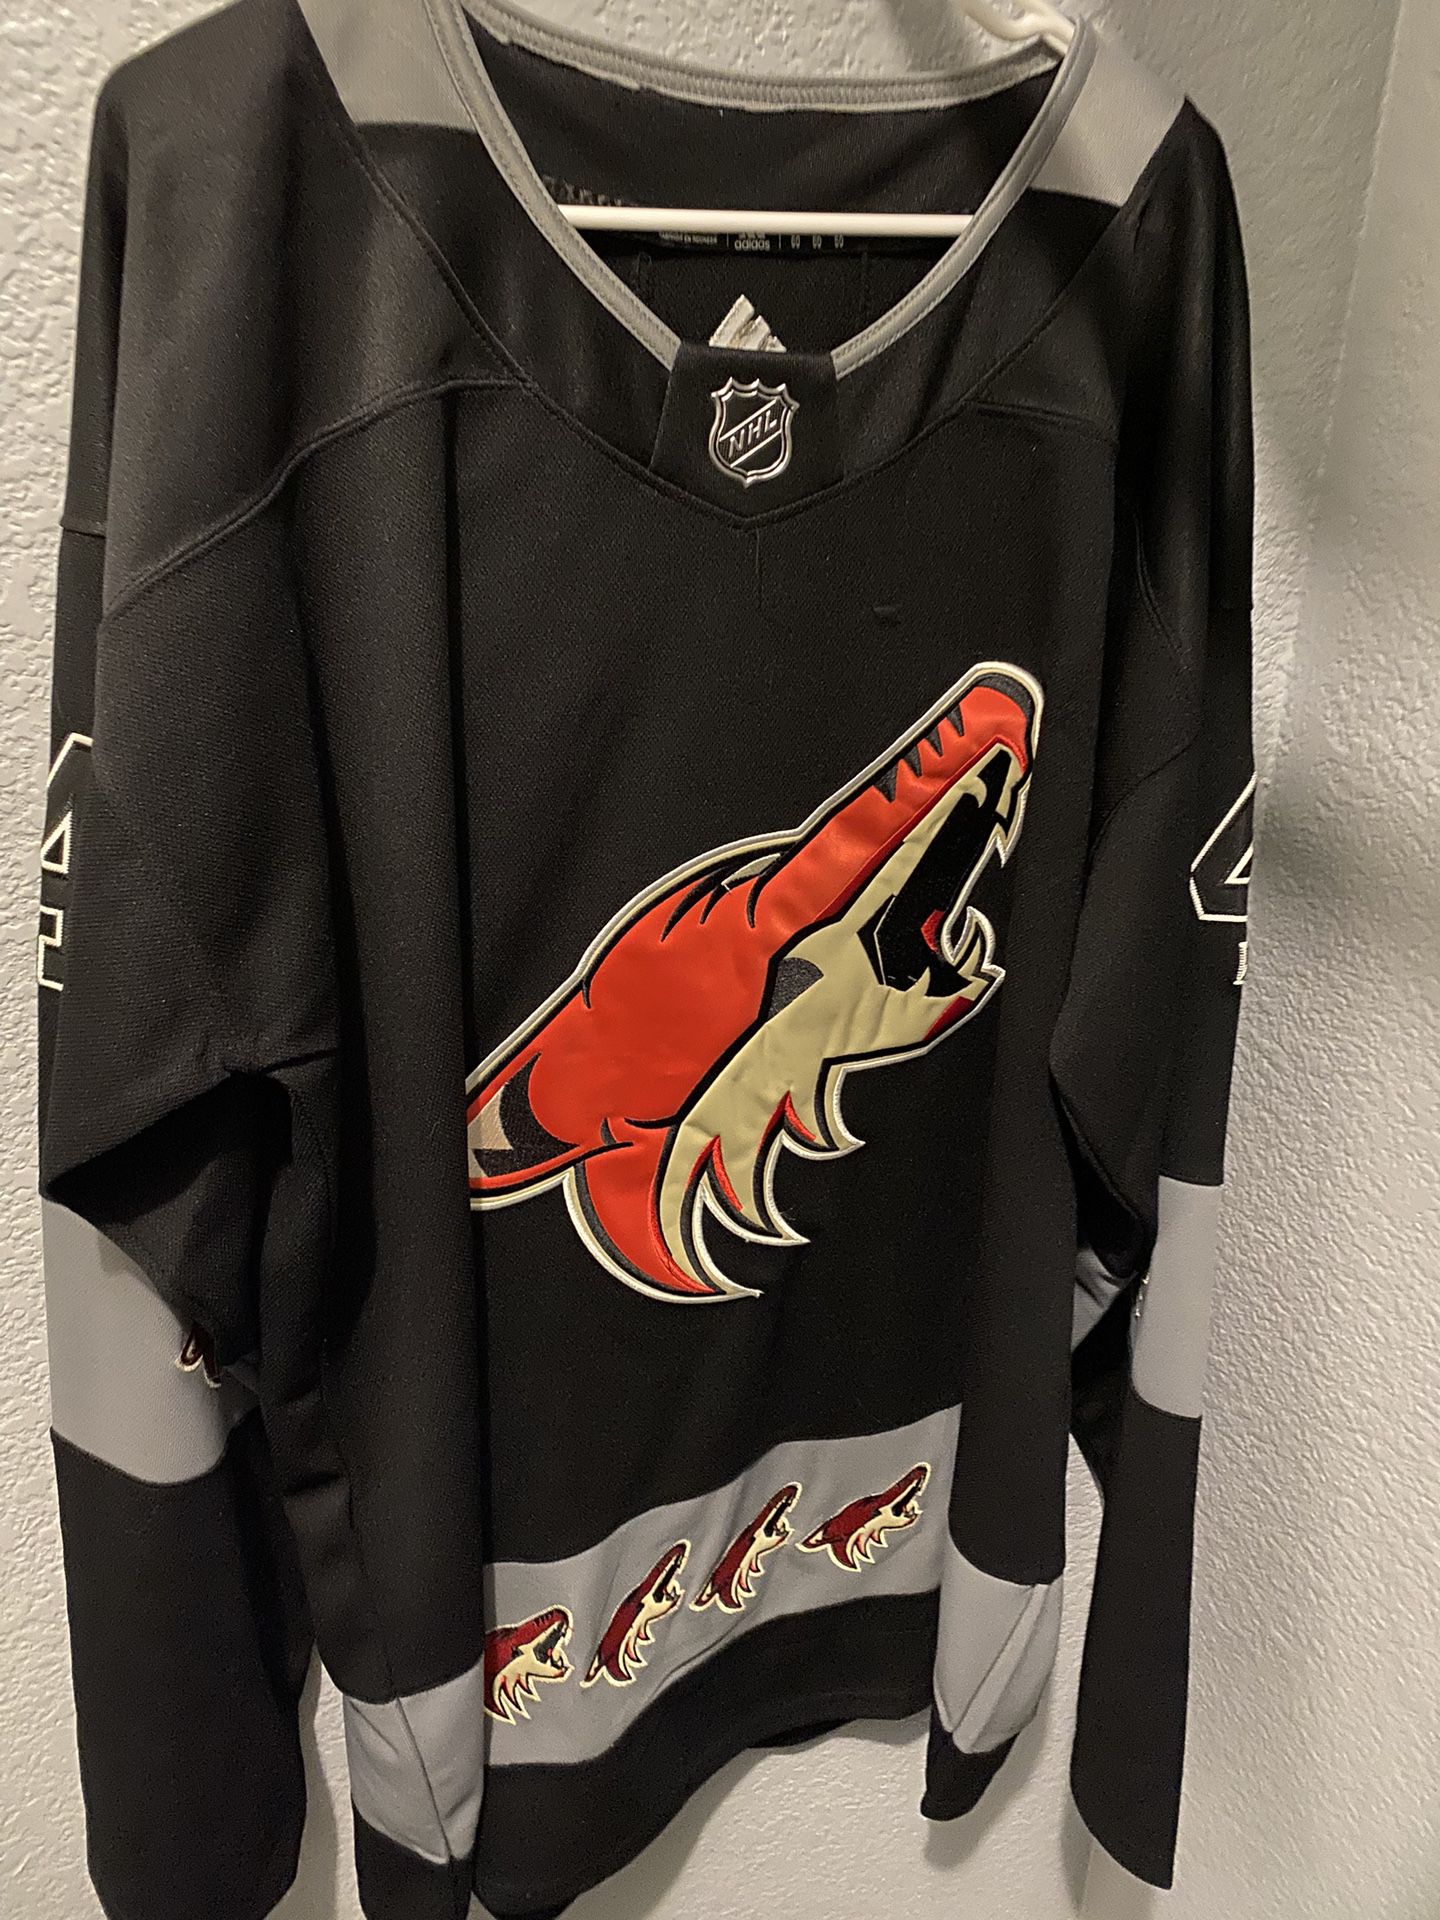 Size 60 Hjalmarsson #4 Coyotes Jersey for Sale in Gilbert, AZ - OfferUp